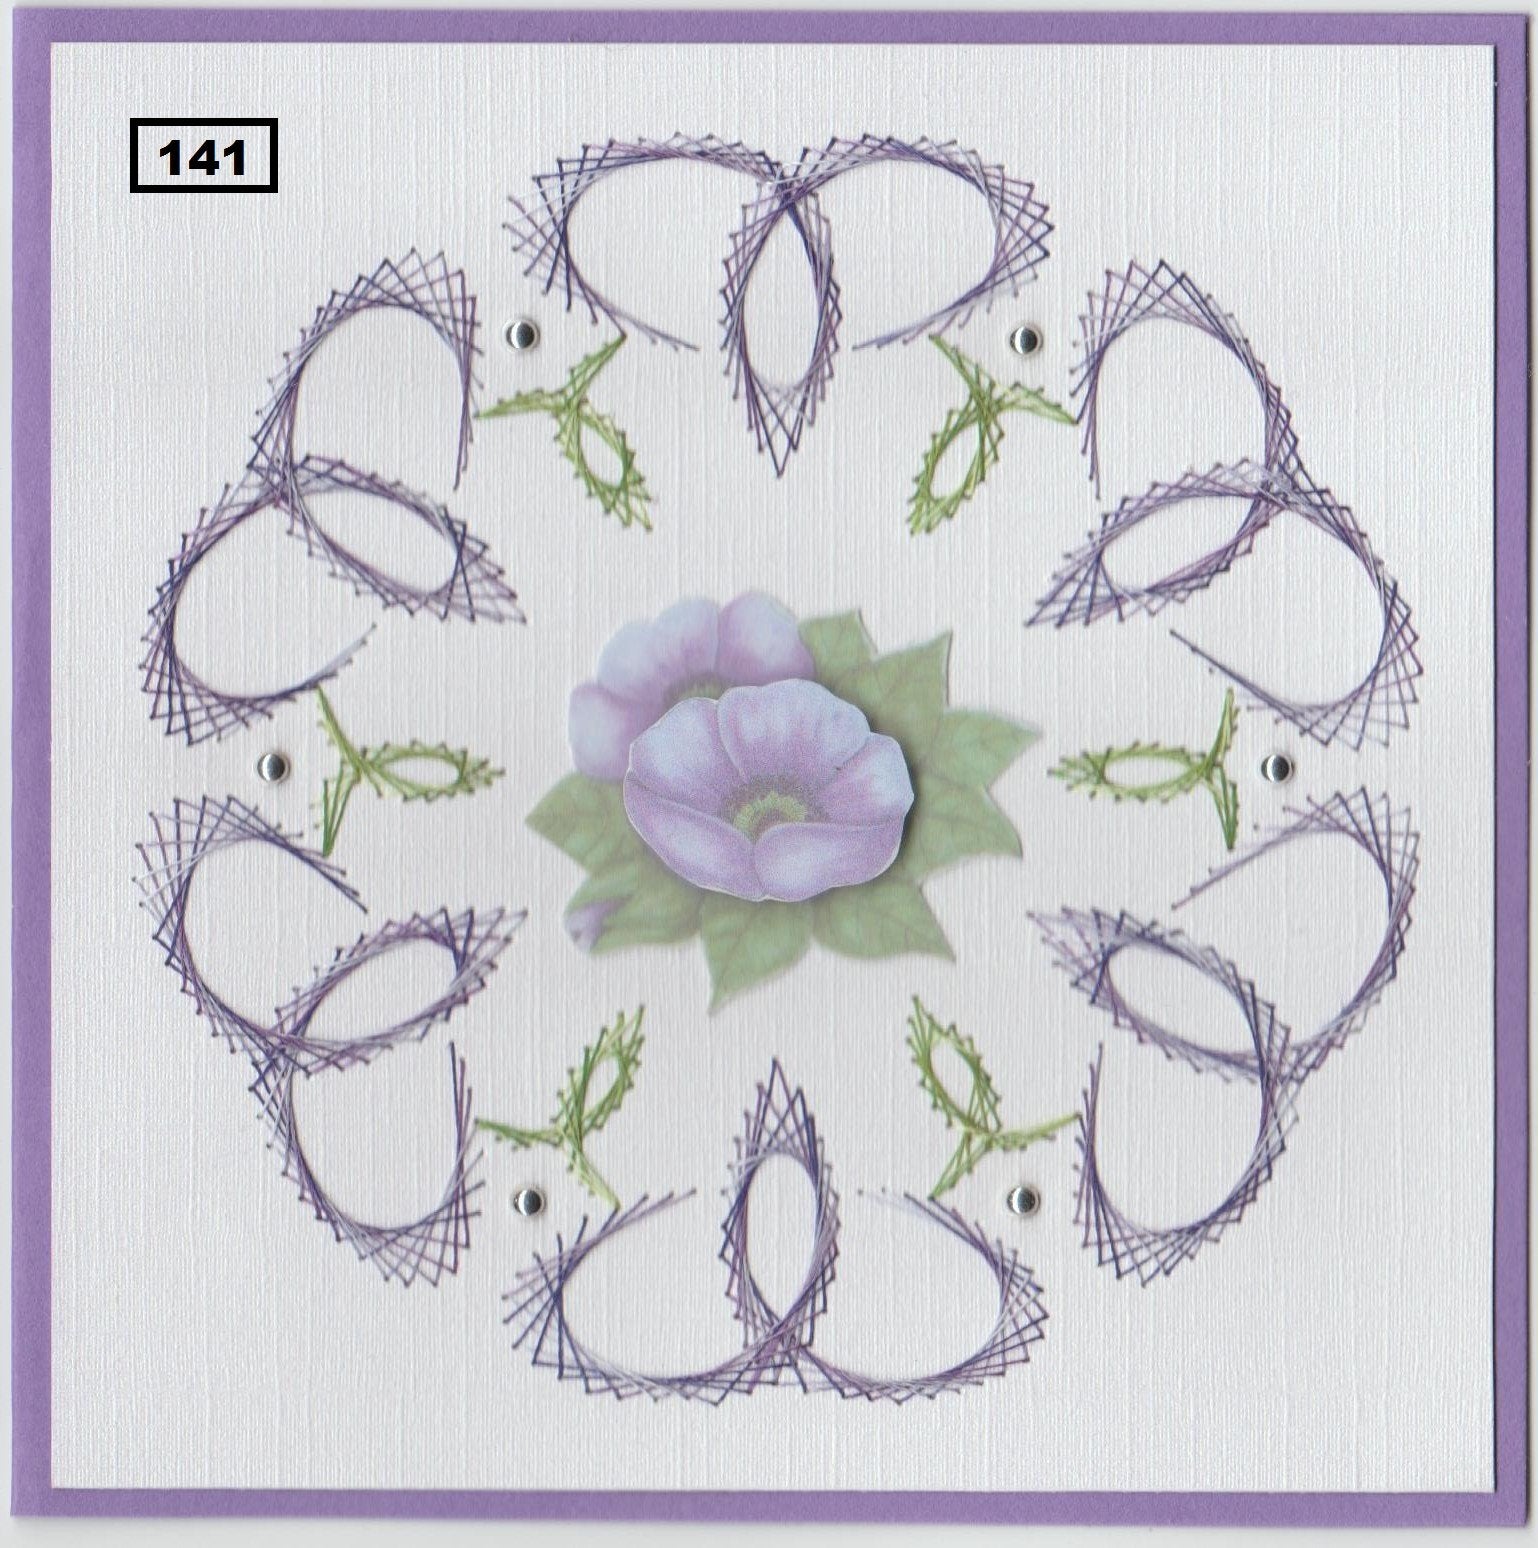 Laura's Design Digital Embroidery Pattern - Infinity Frame